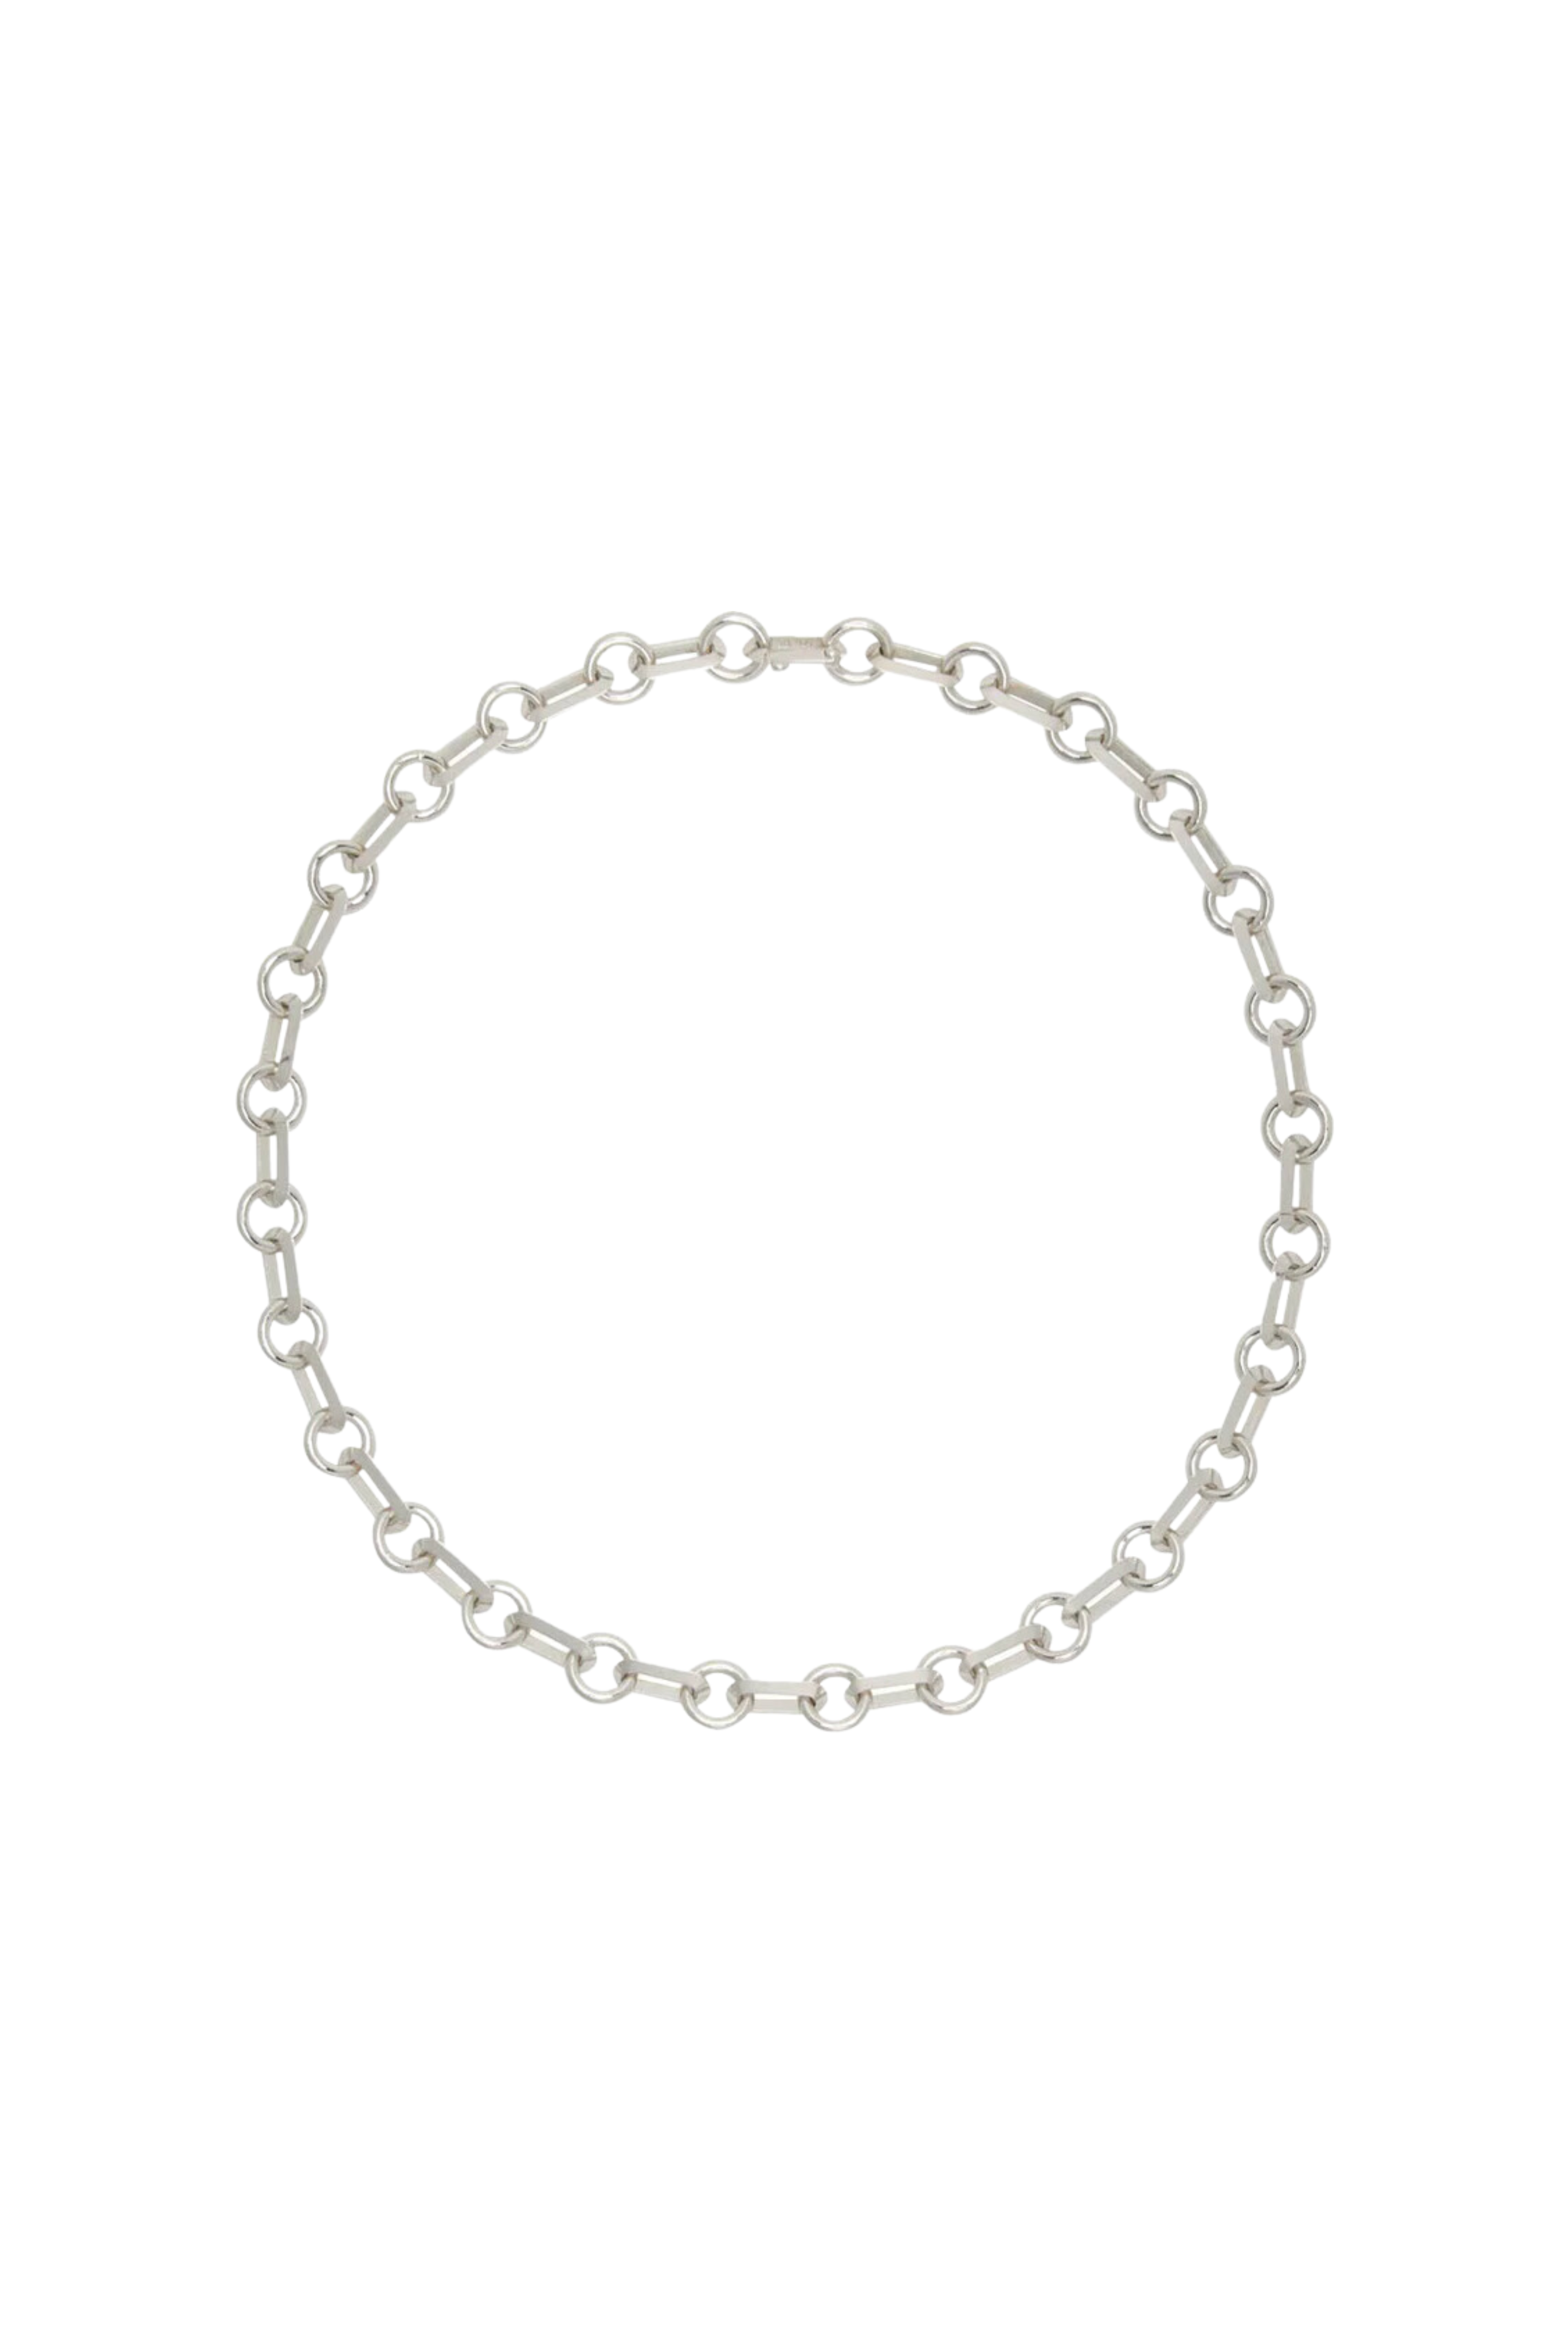 SOPHIE BUHAI Yves Silver Chain Necklace